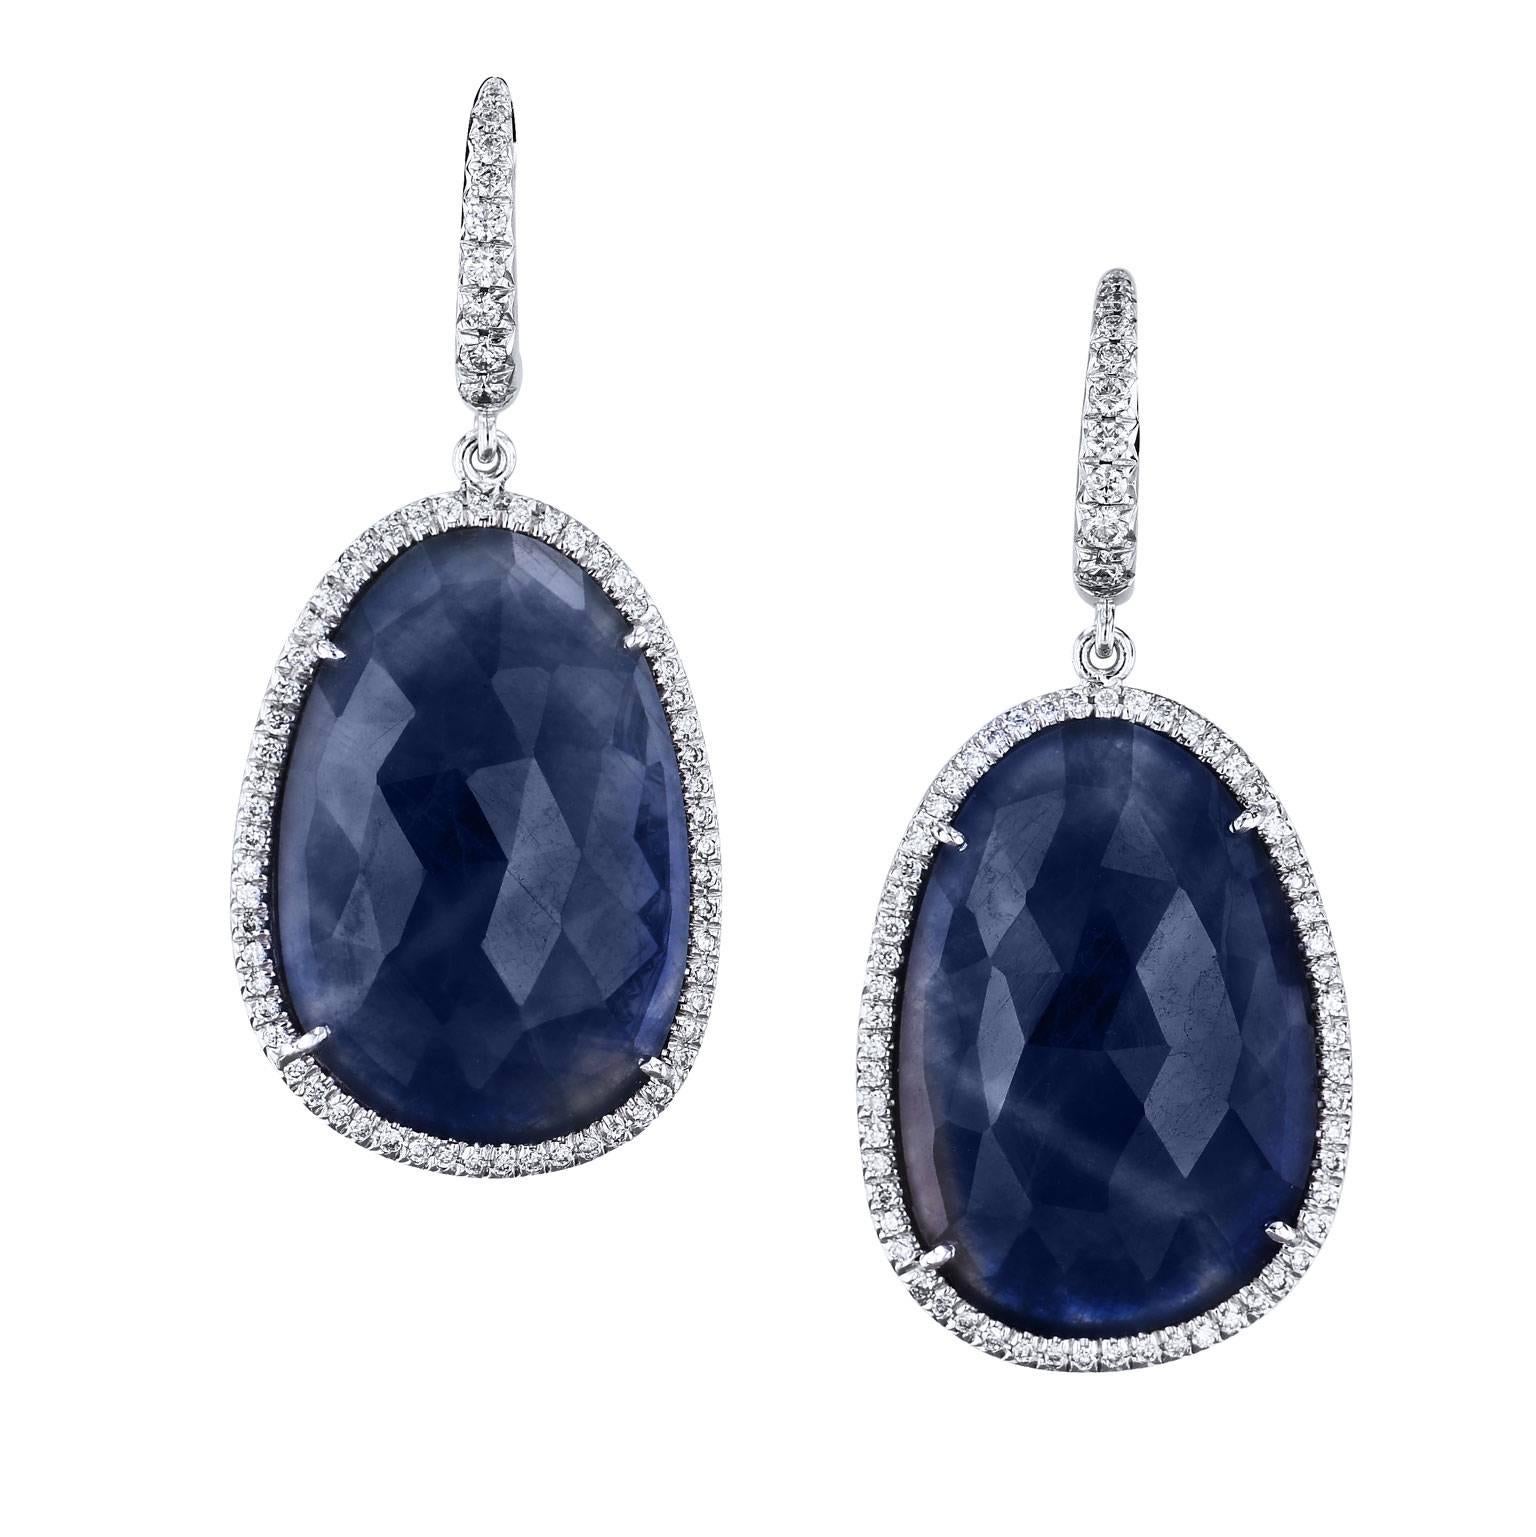 32.27 Carat Blue Sapphire and Pave Diamond Drop Earrings in 18 karat White Gold